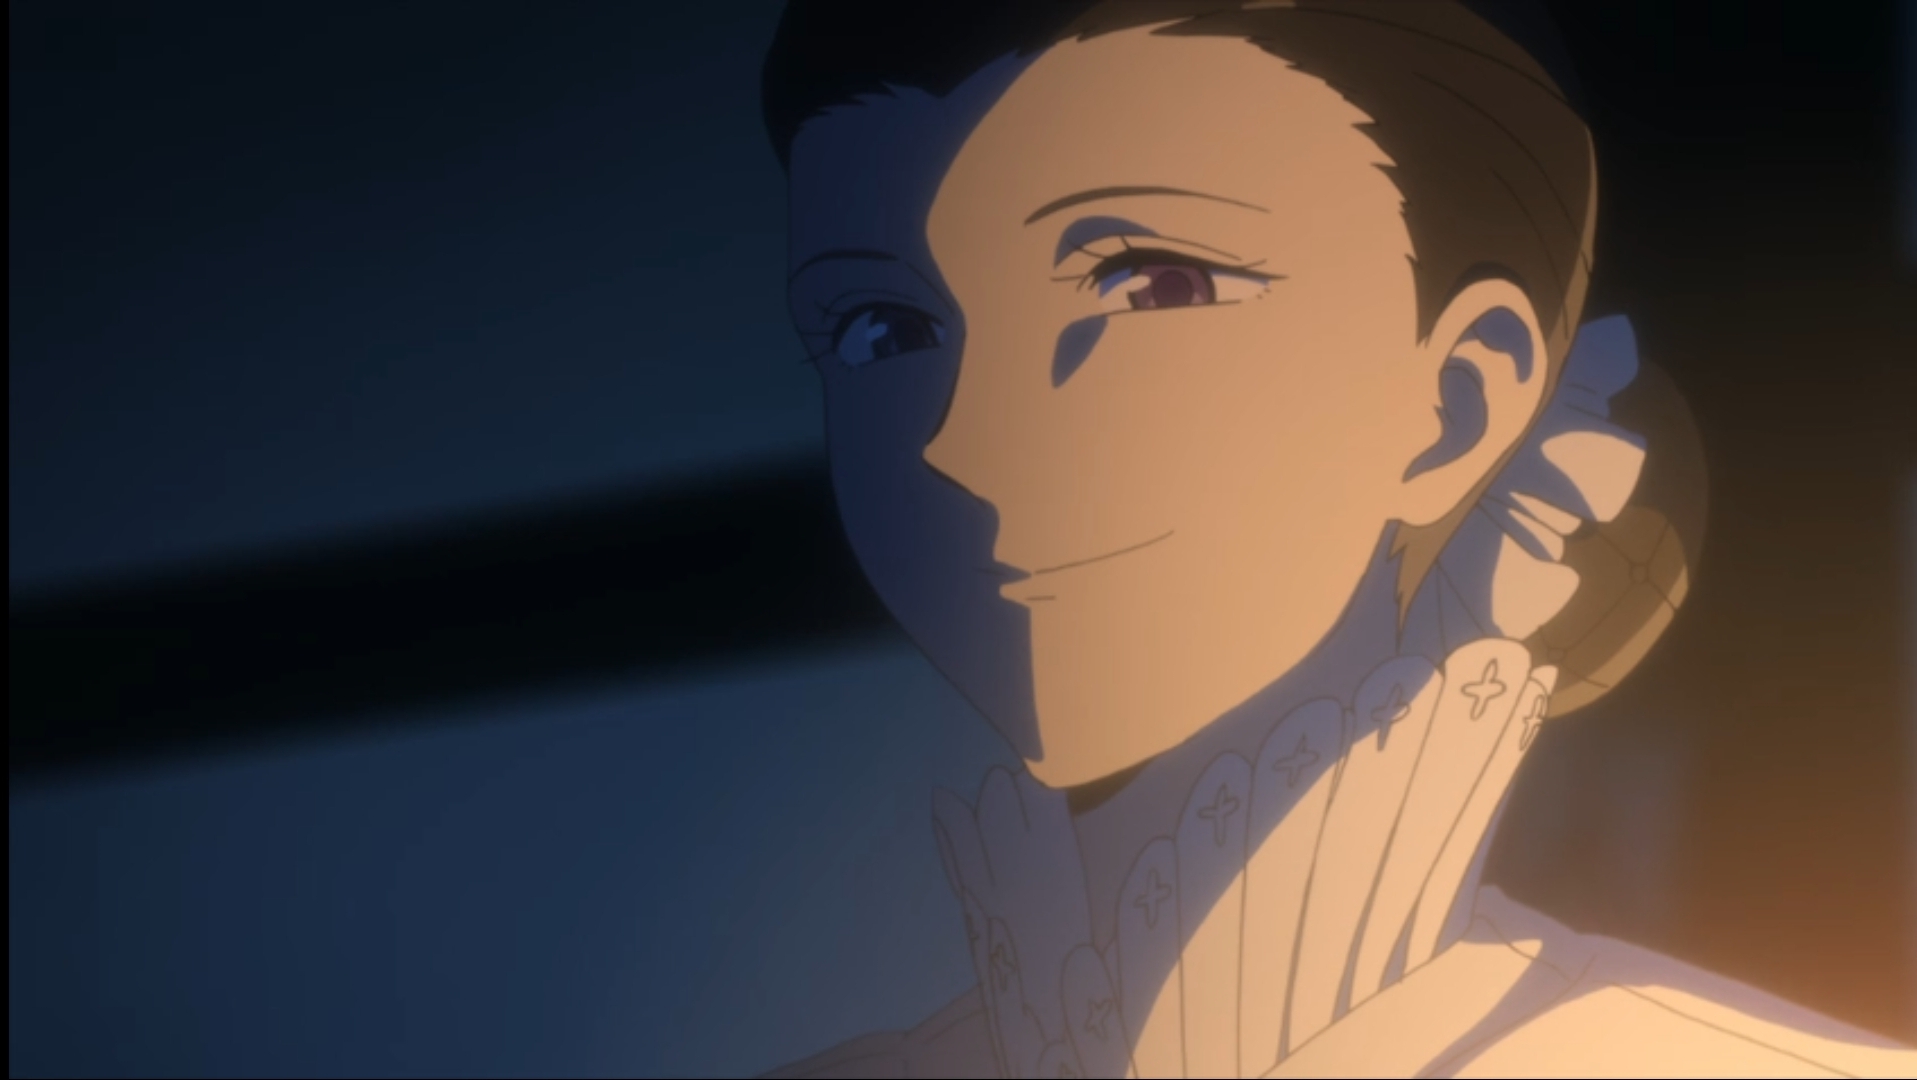 The Promised Neverland Episode 11 - Zwischenzug - I drink and watch anime